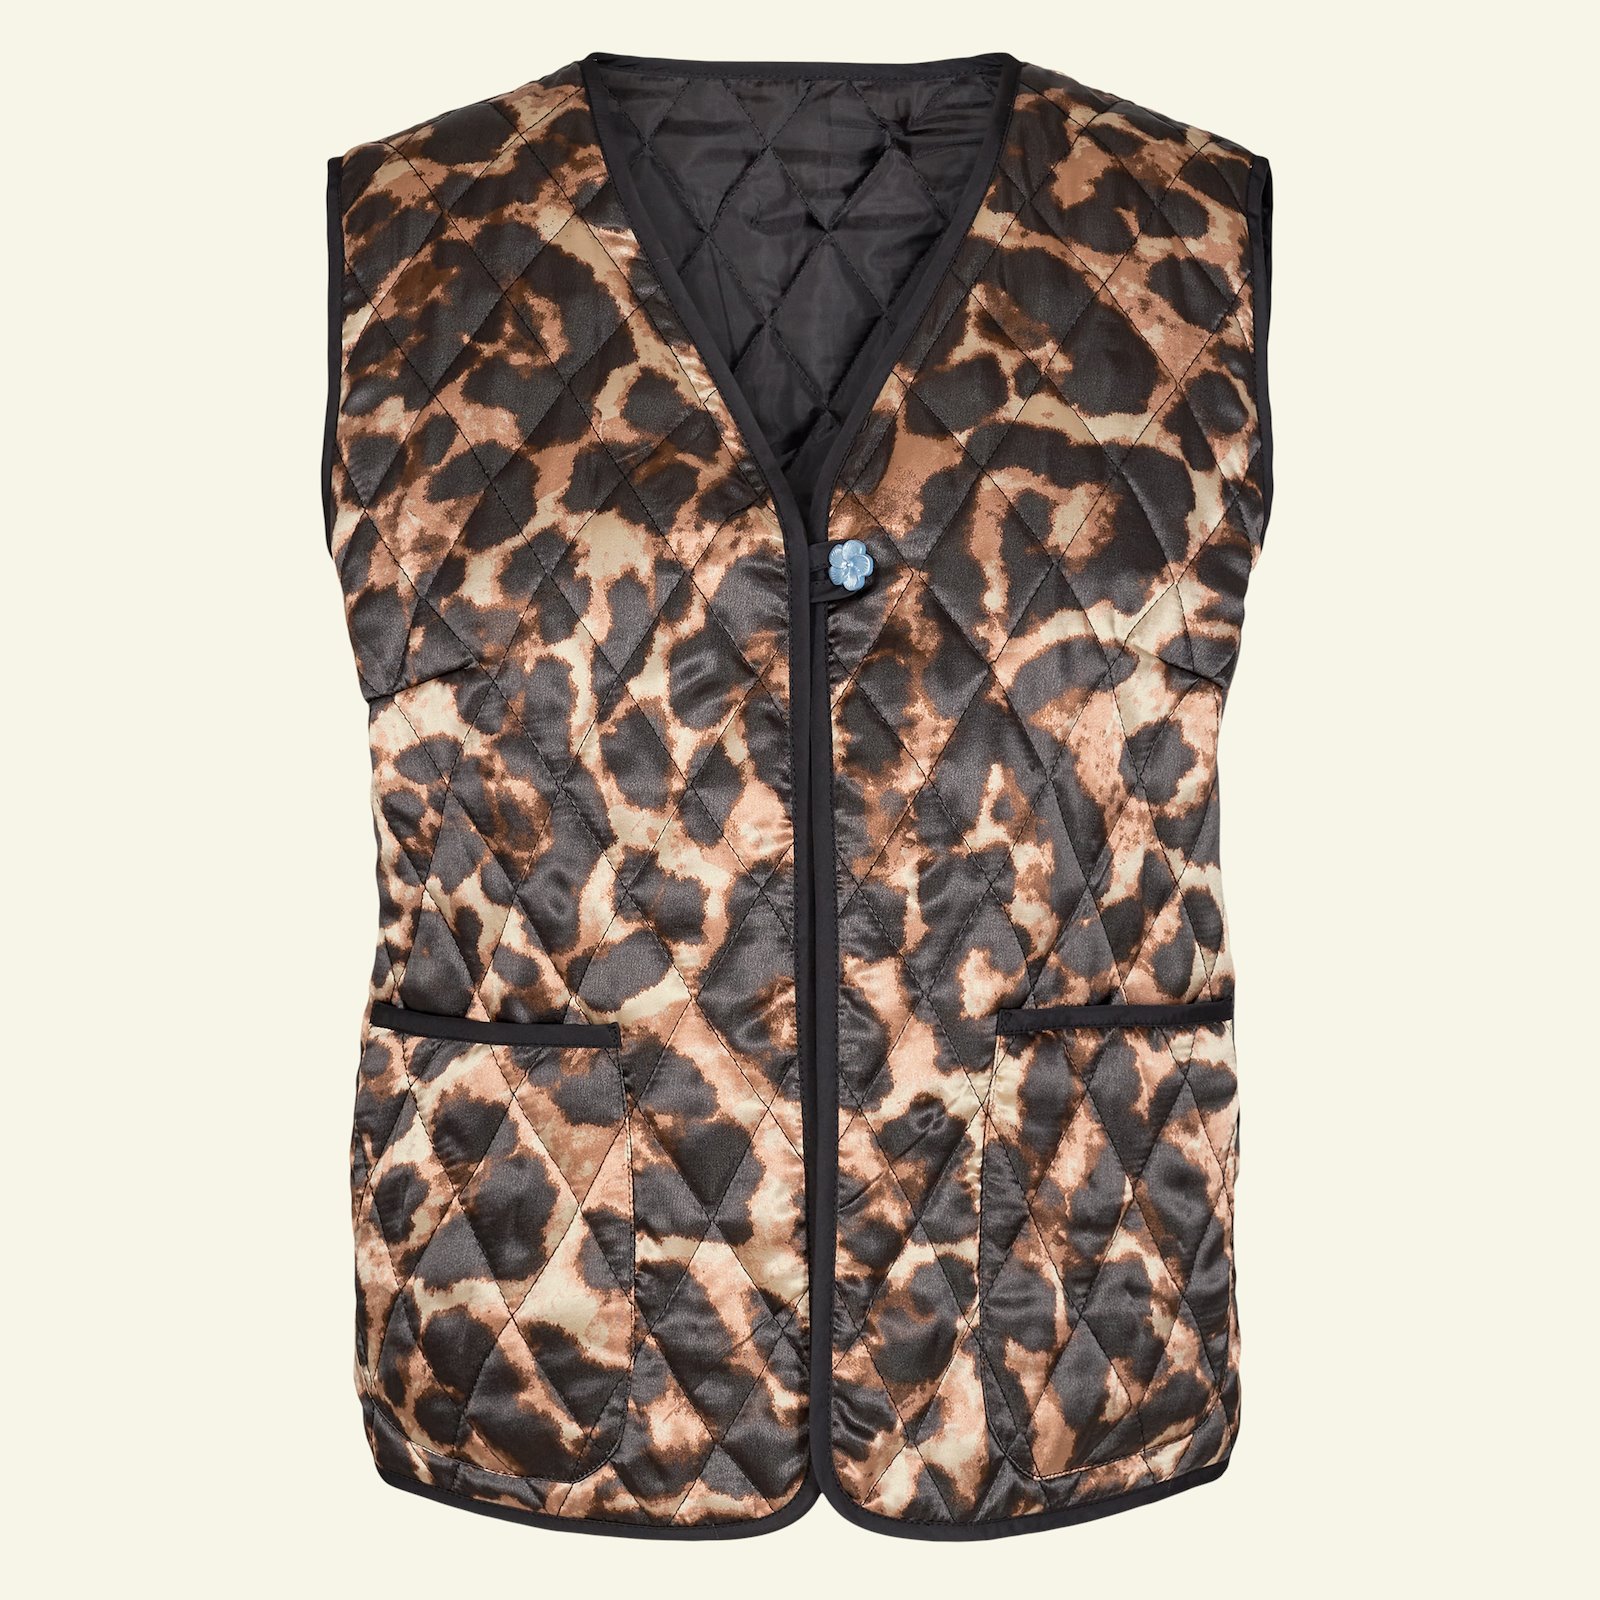 Quilted jacket and waistcoat, 36/8 p24047_920226_64080_sskit